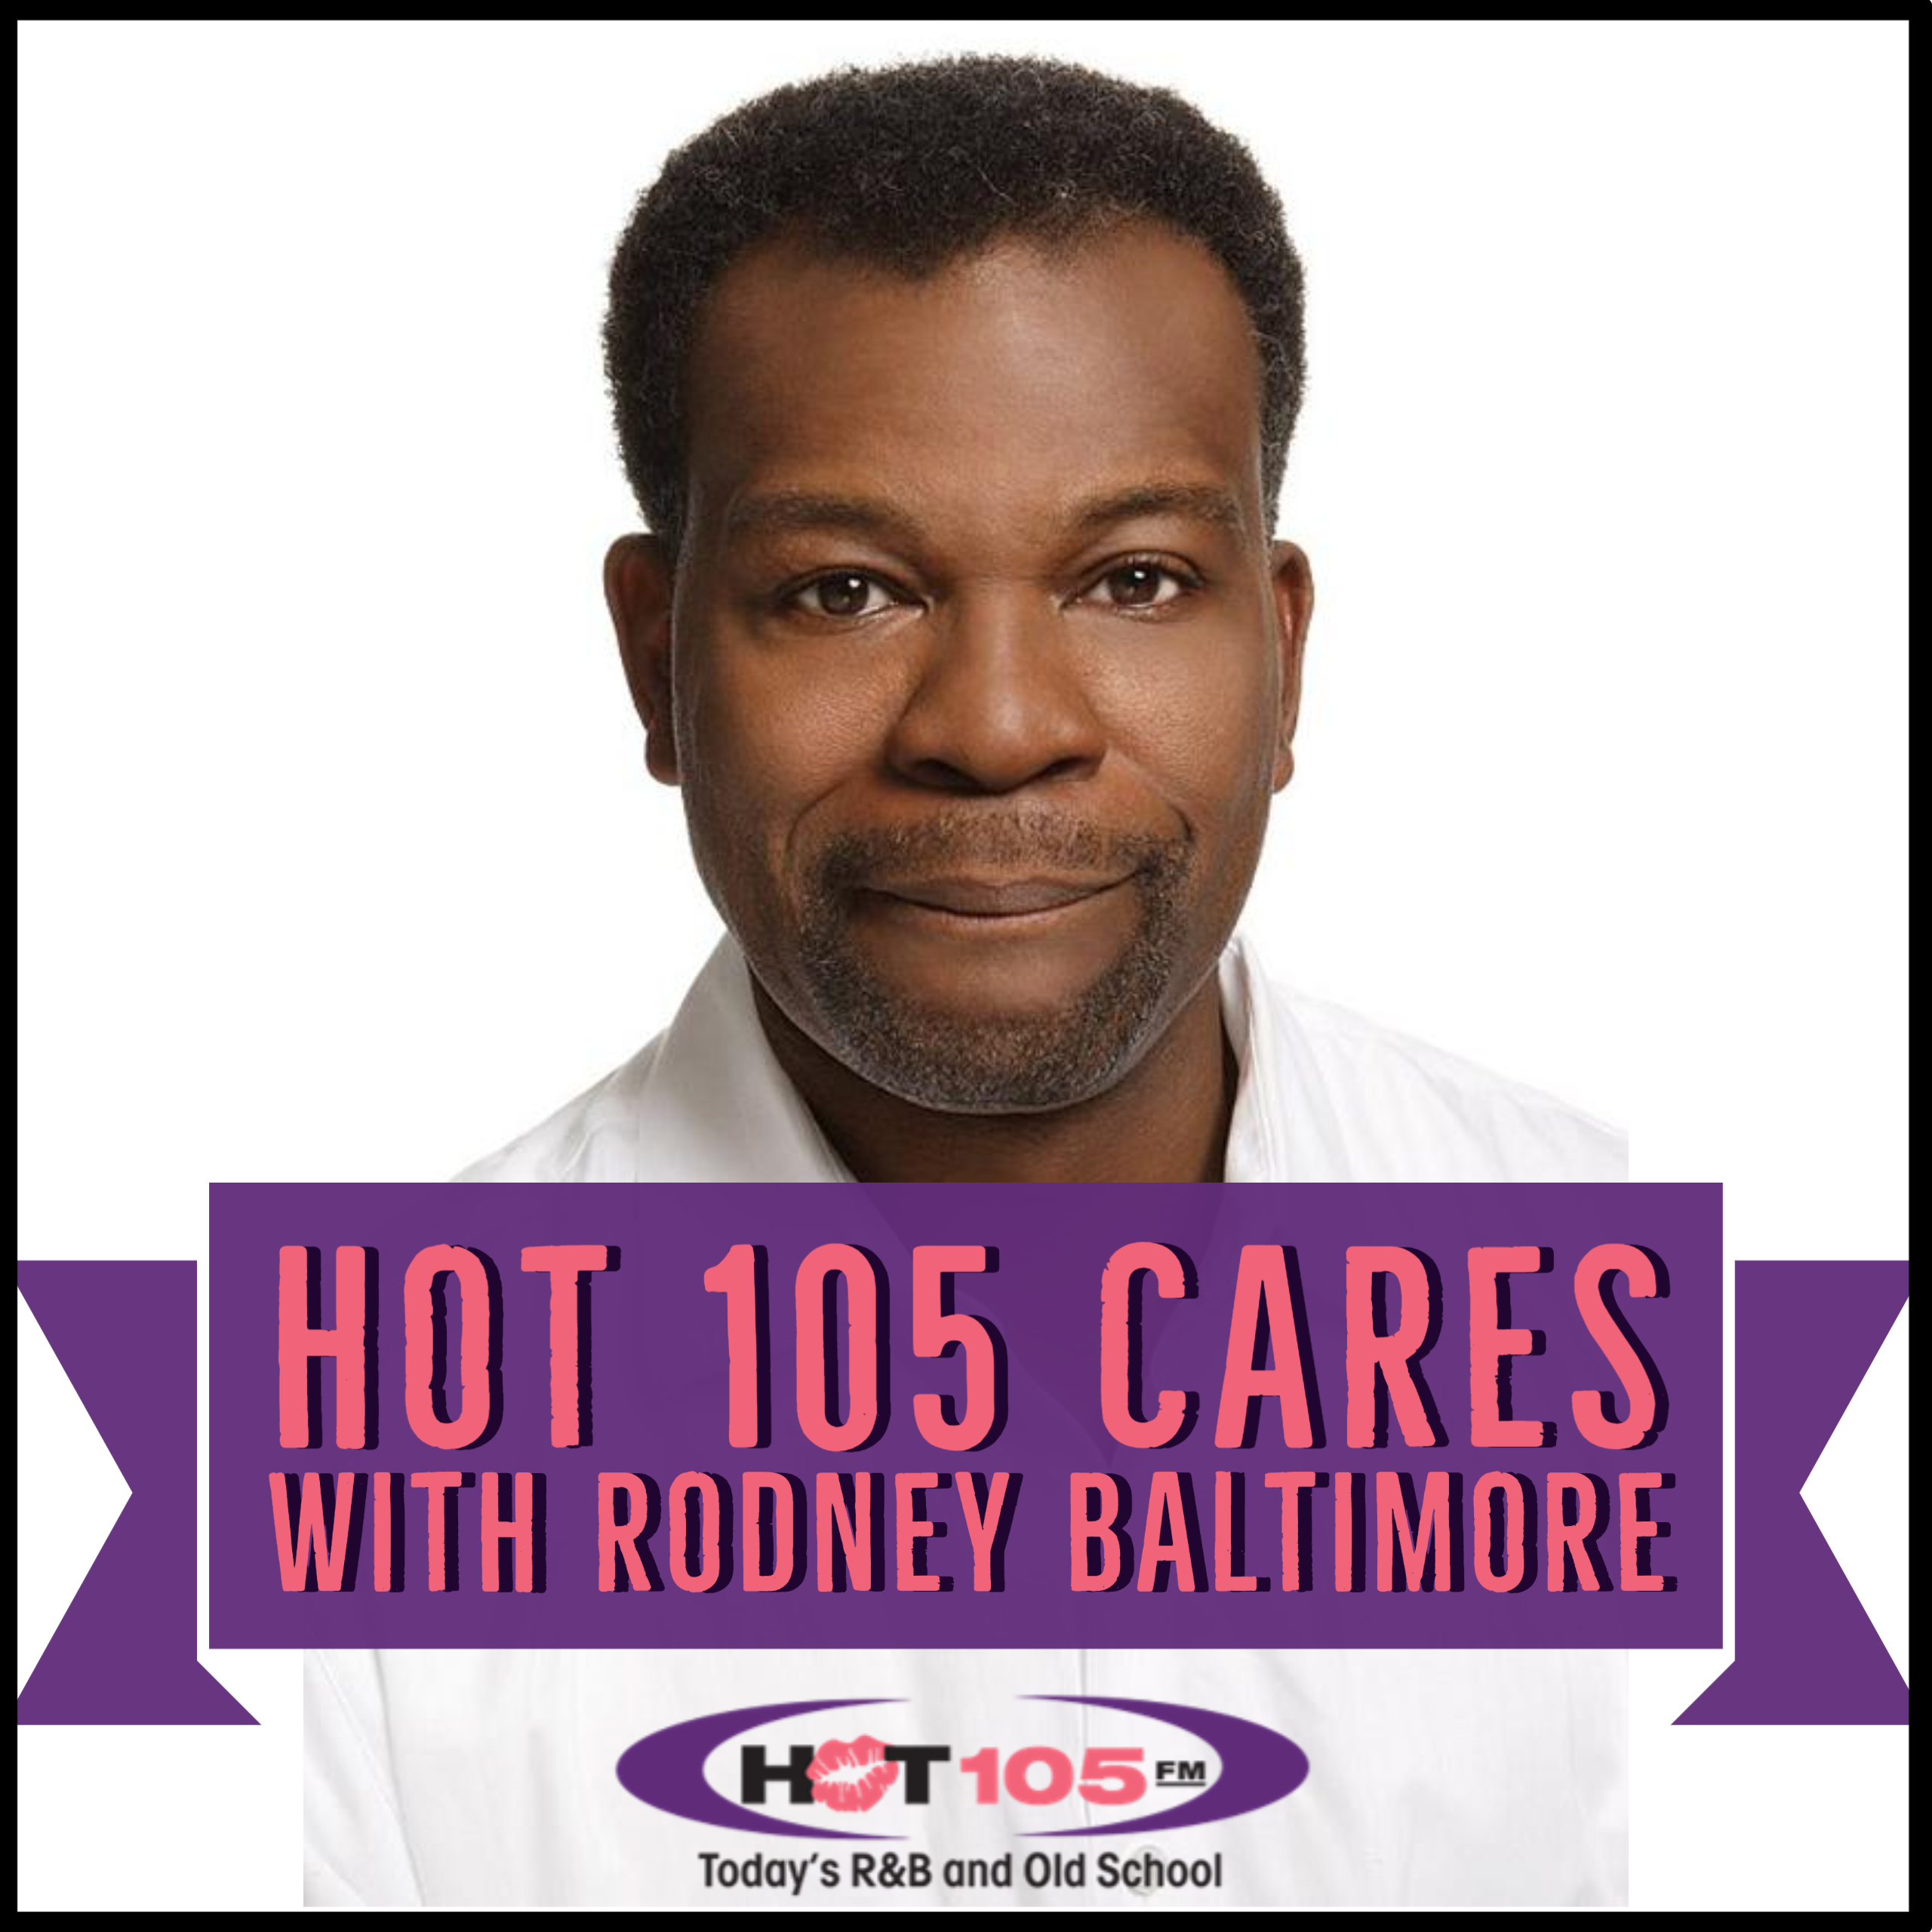 Hot 105 Cares with Rodney Baltimore